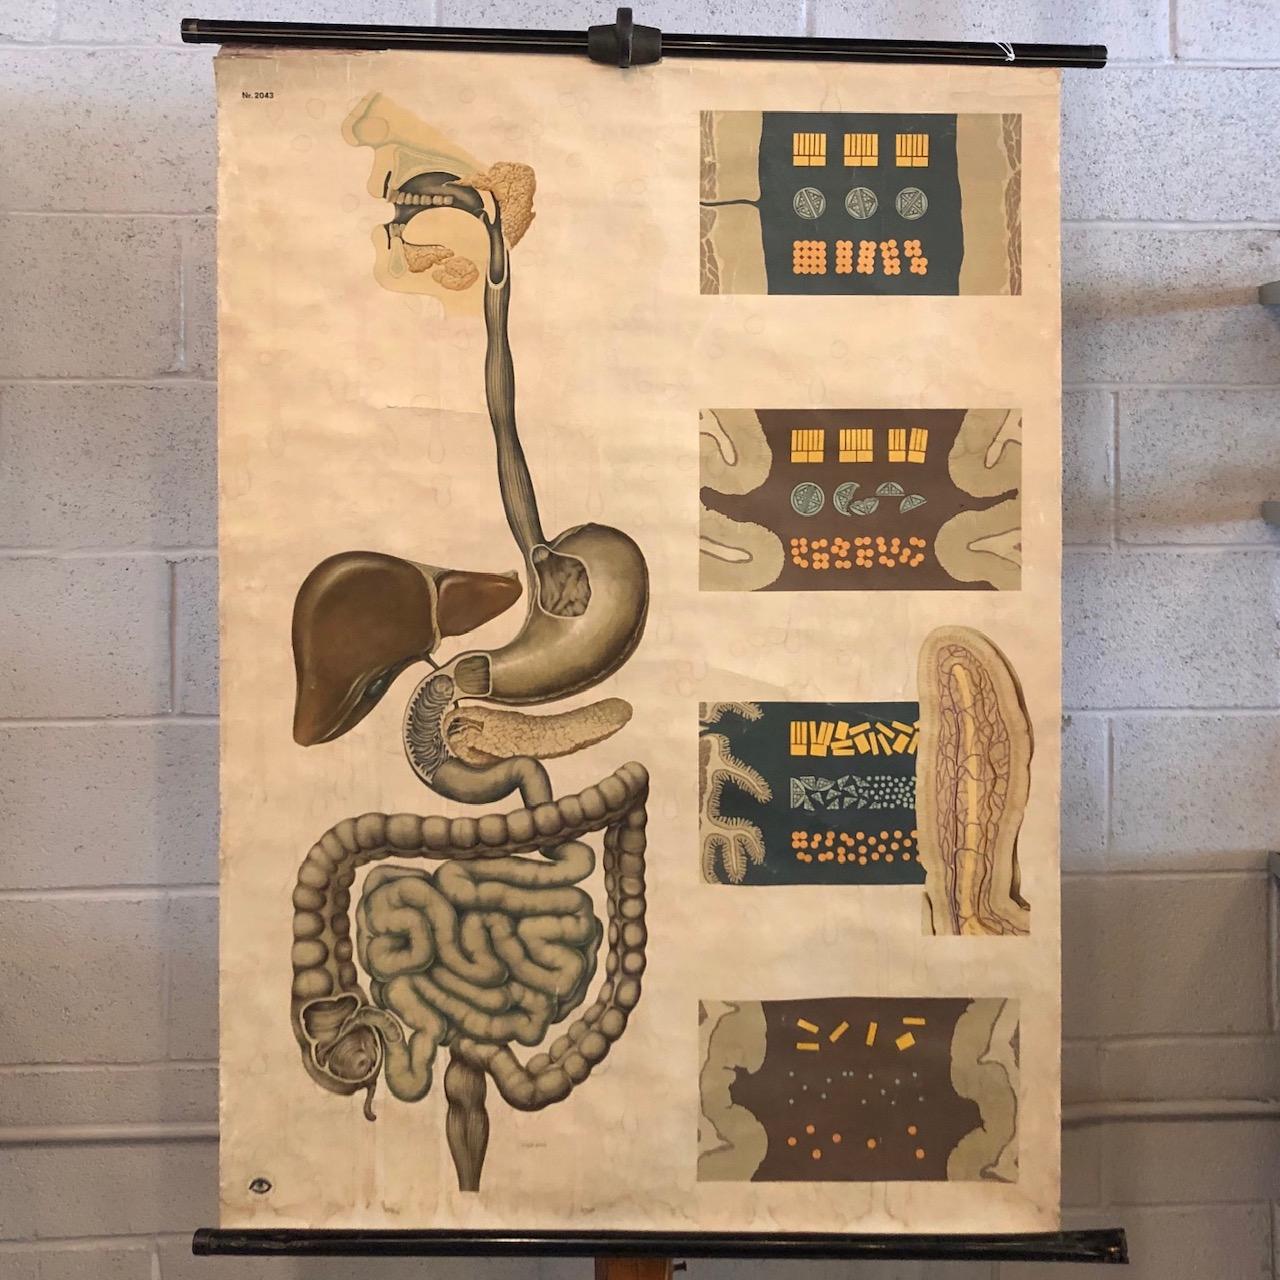 German, educational, anatomical, roll-up chart depicting digestion 